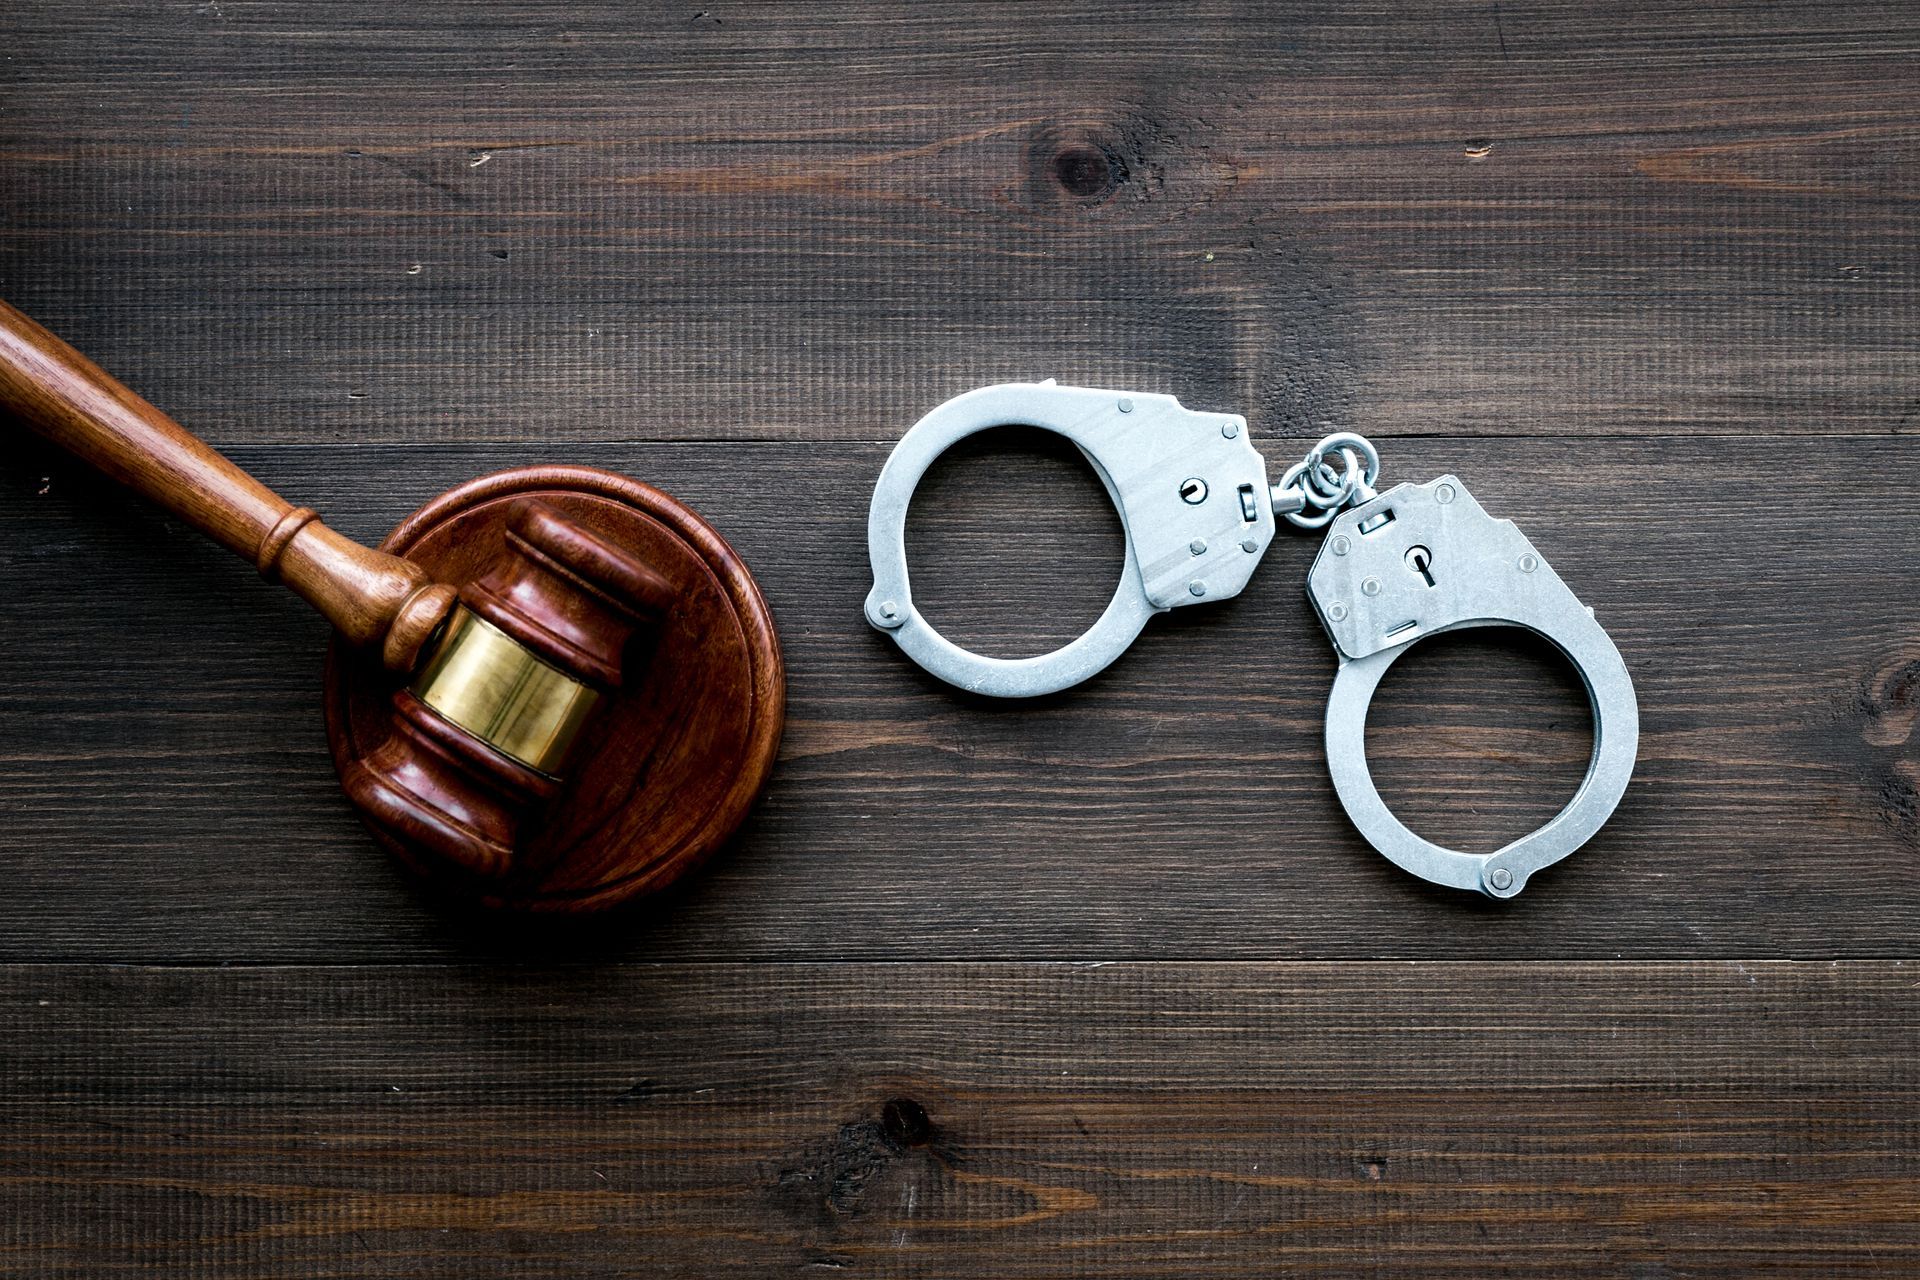 a pair of handcuffs and a judge 's gavel on a wooden table .